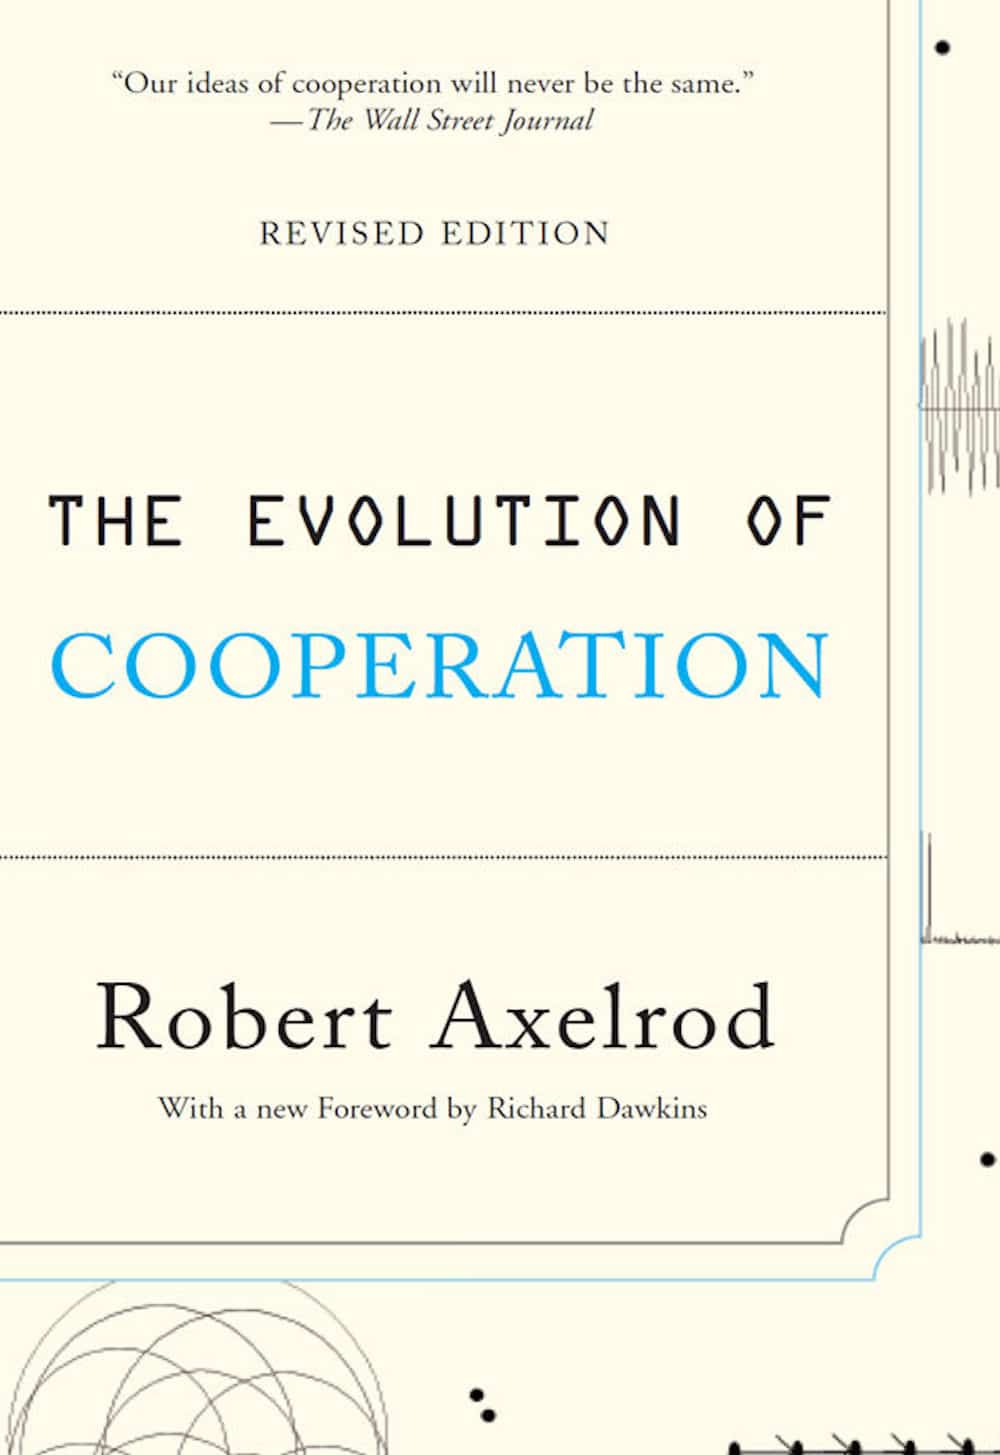 The cover of The Evolution of Cooperation